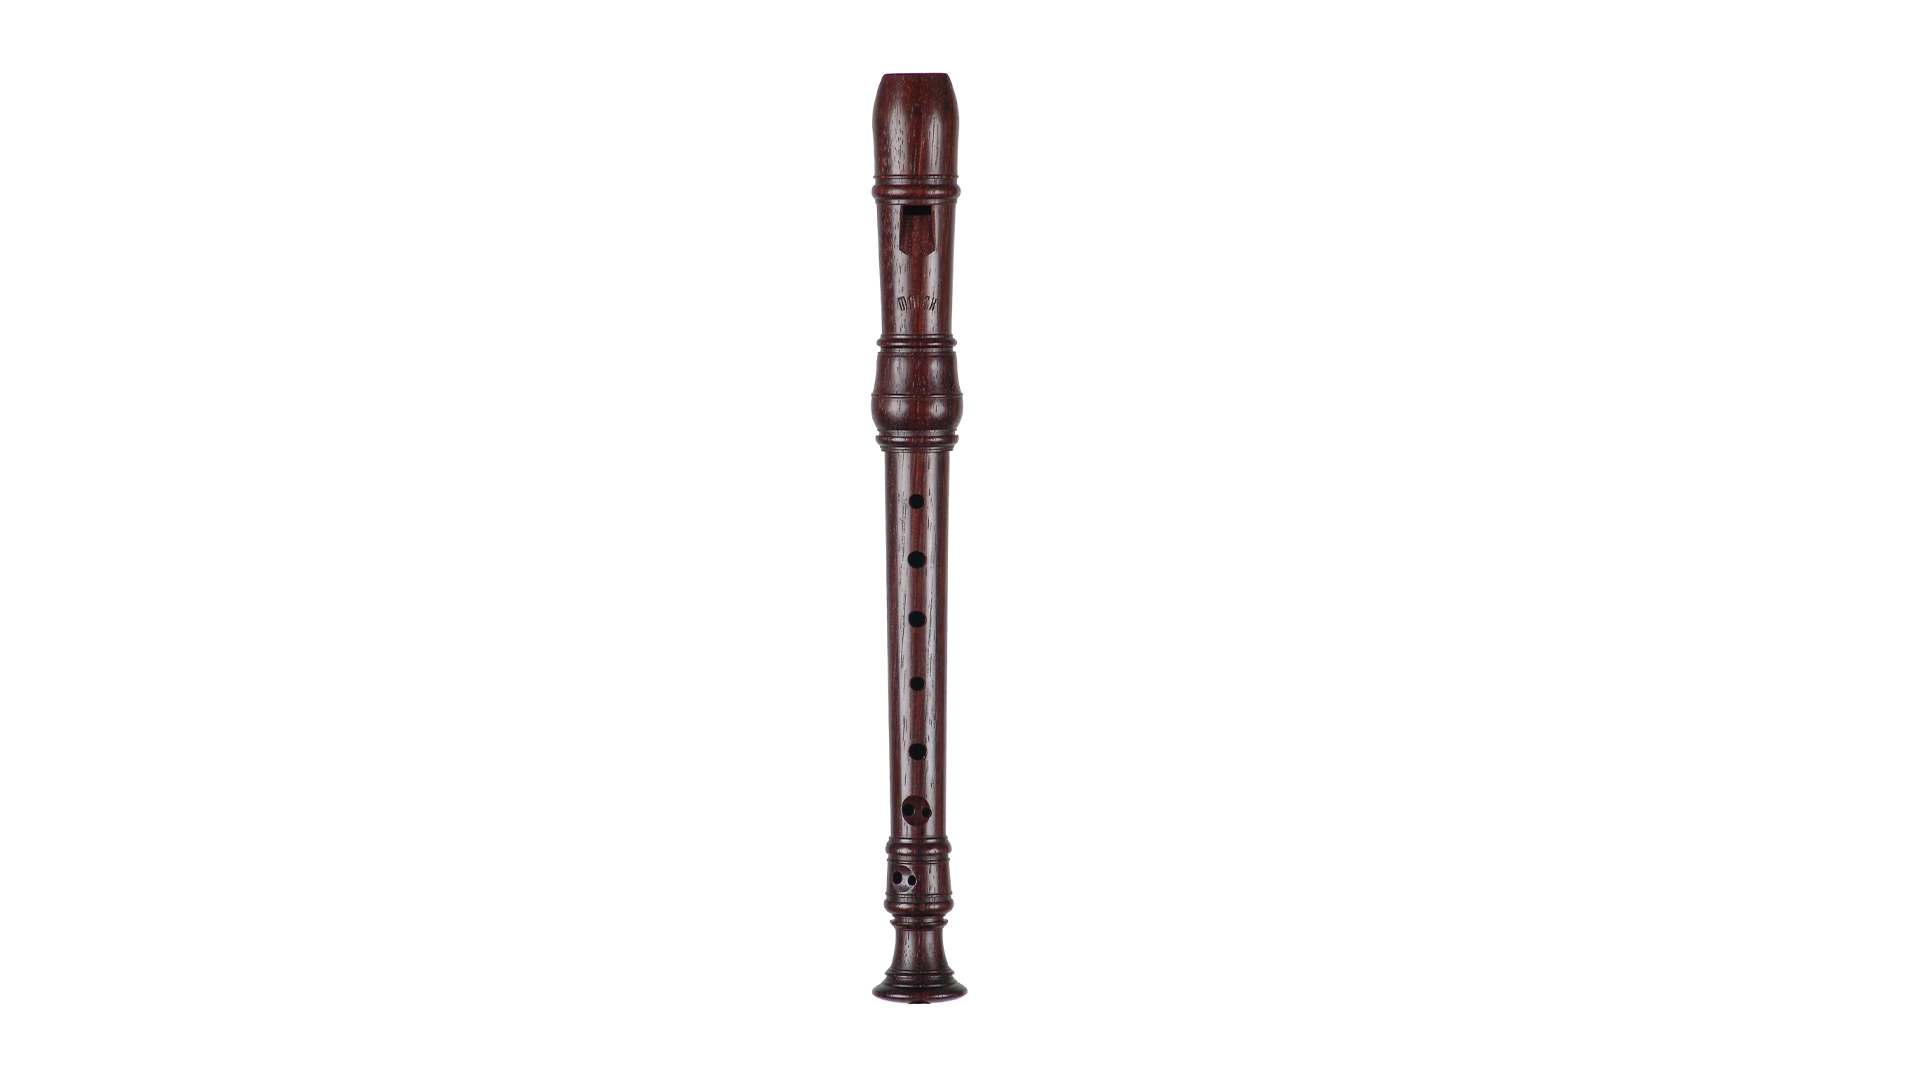 Moeck, "Rottenburgh", sopranino in f'', baroque double hole, rosewood